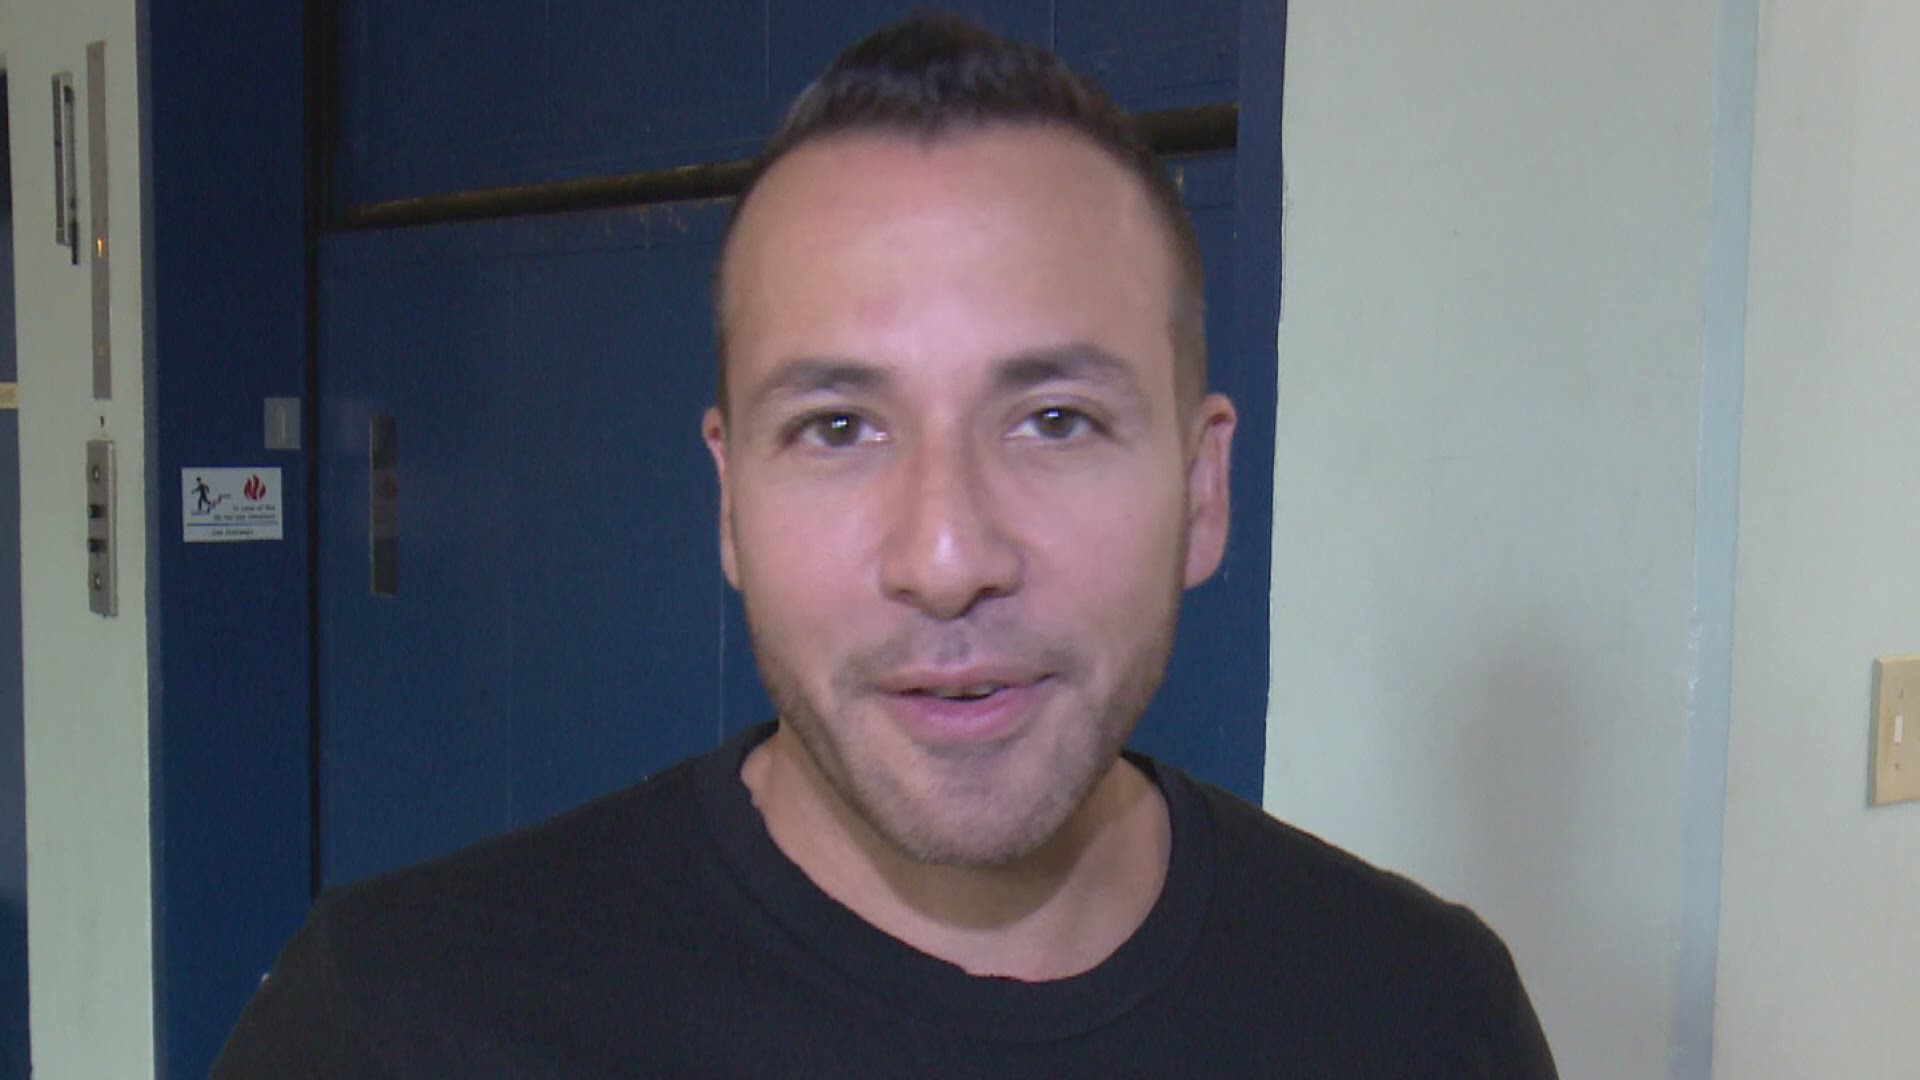 Howie Dorough gave a shout out to Down Syndrome of Louisville for their music video of a Backstreet Boys song.